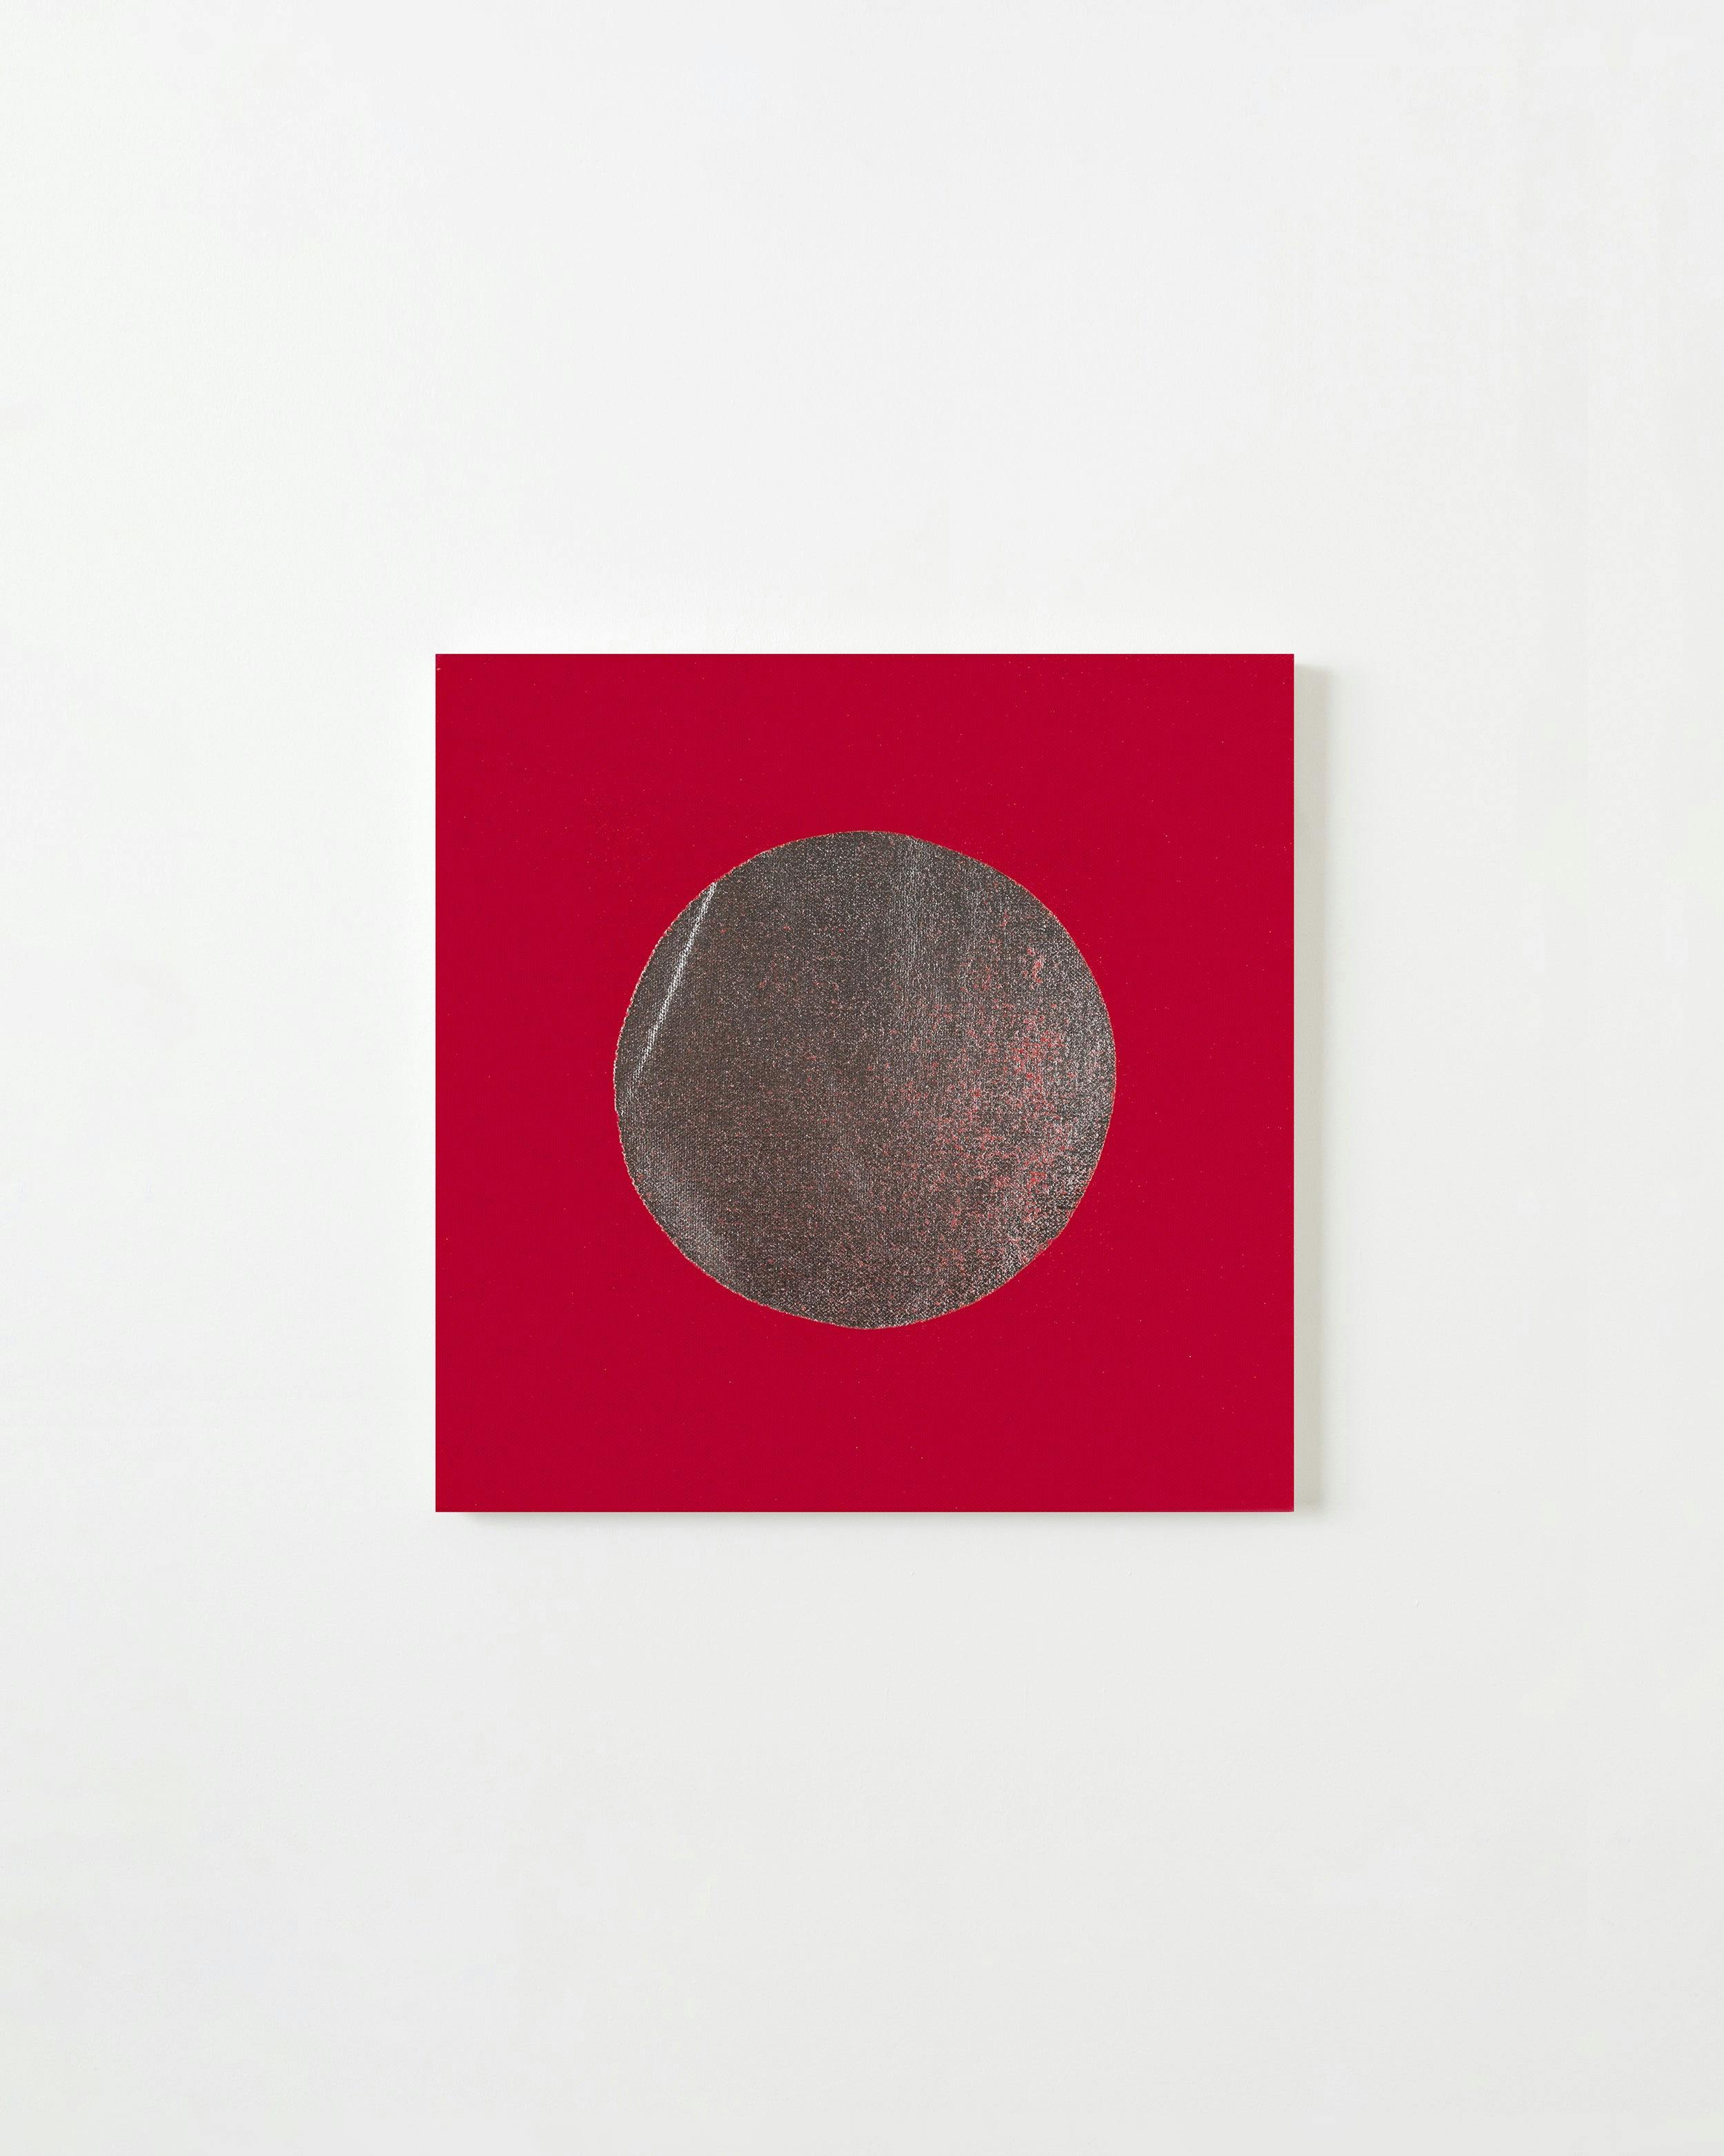 Painting by Chad Kouri titled "Reflection Pool Red (1x1)".